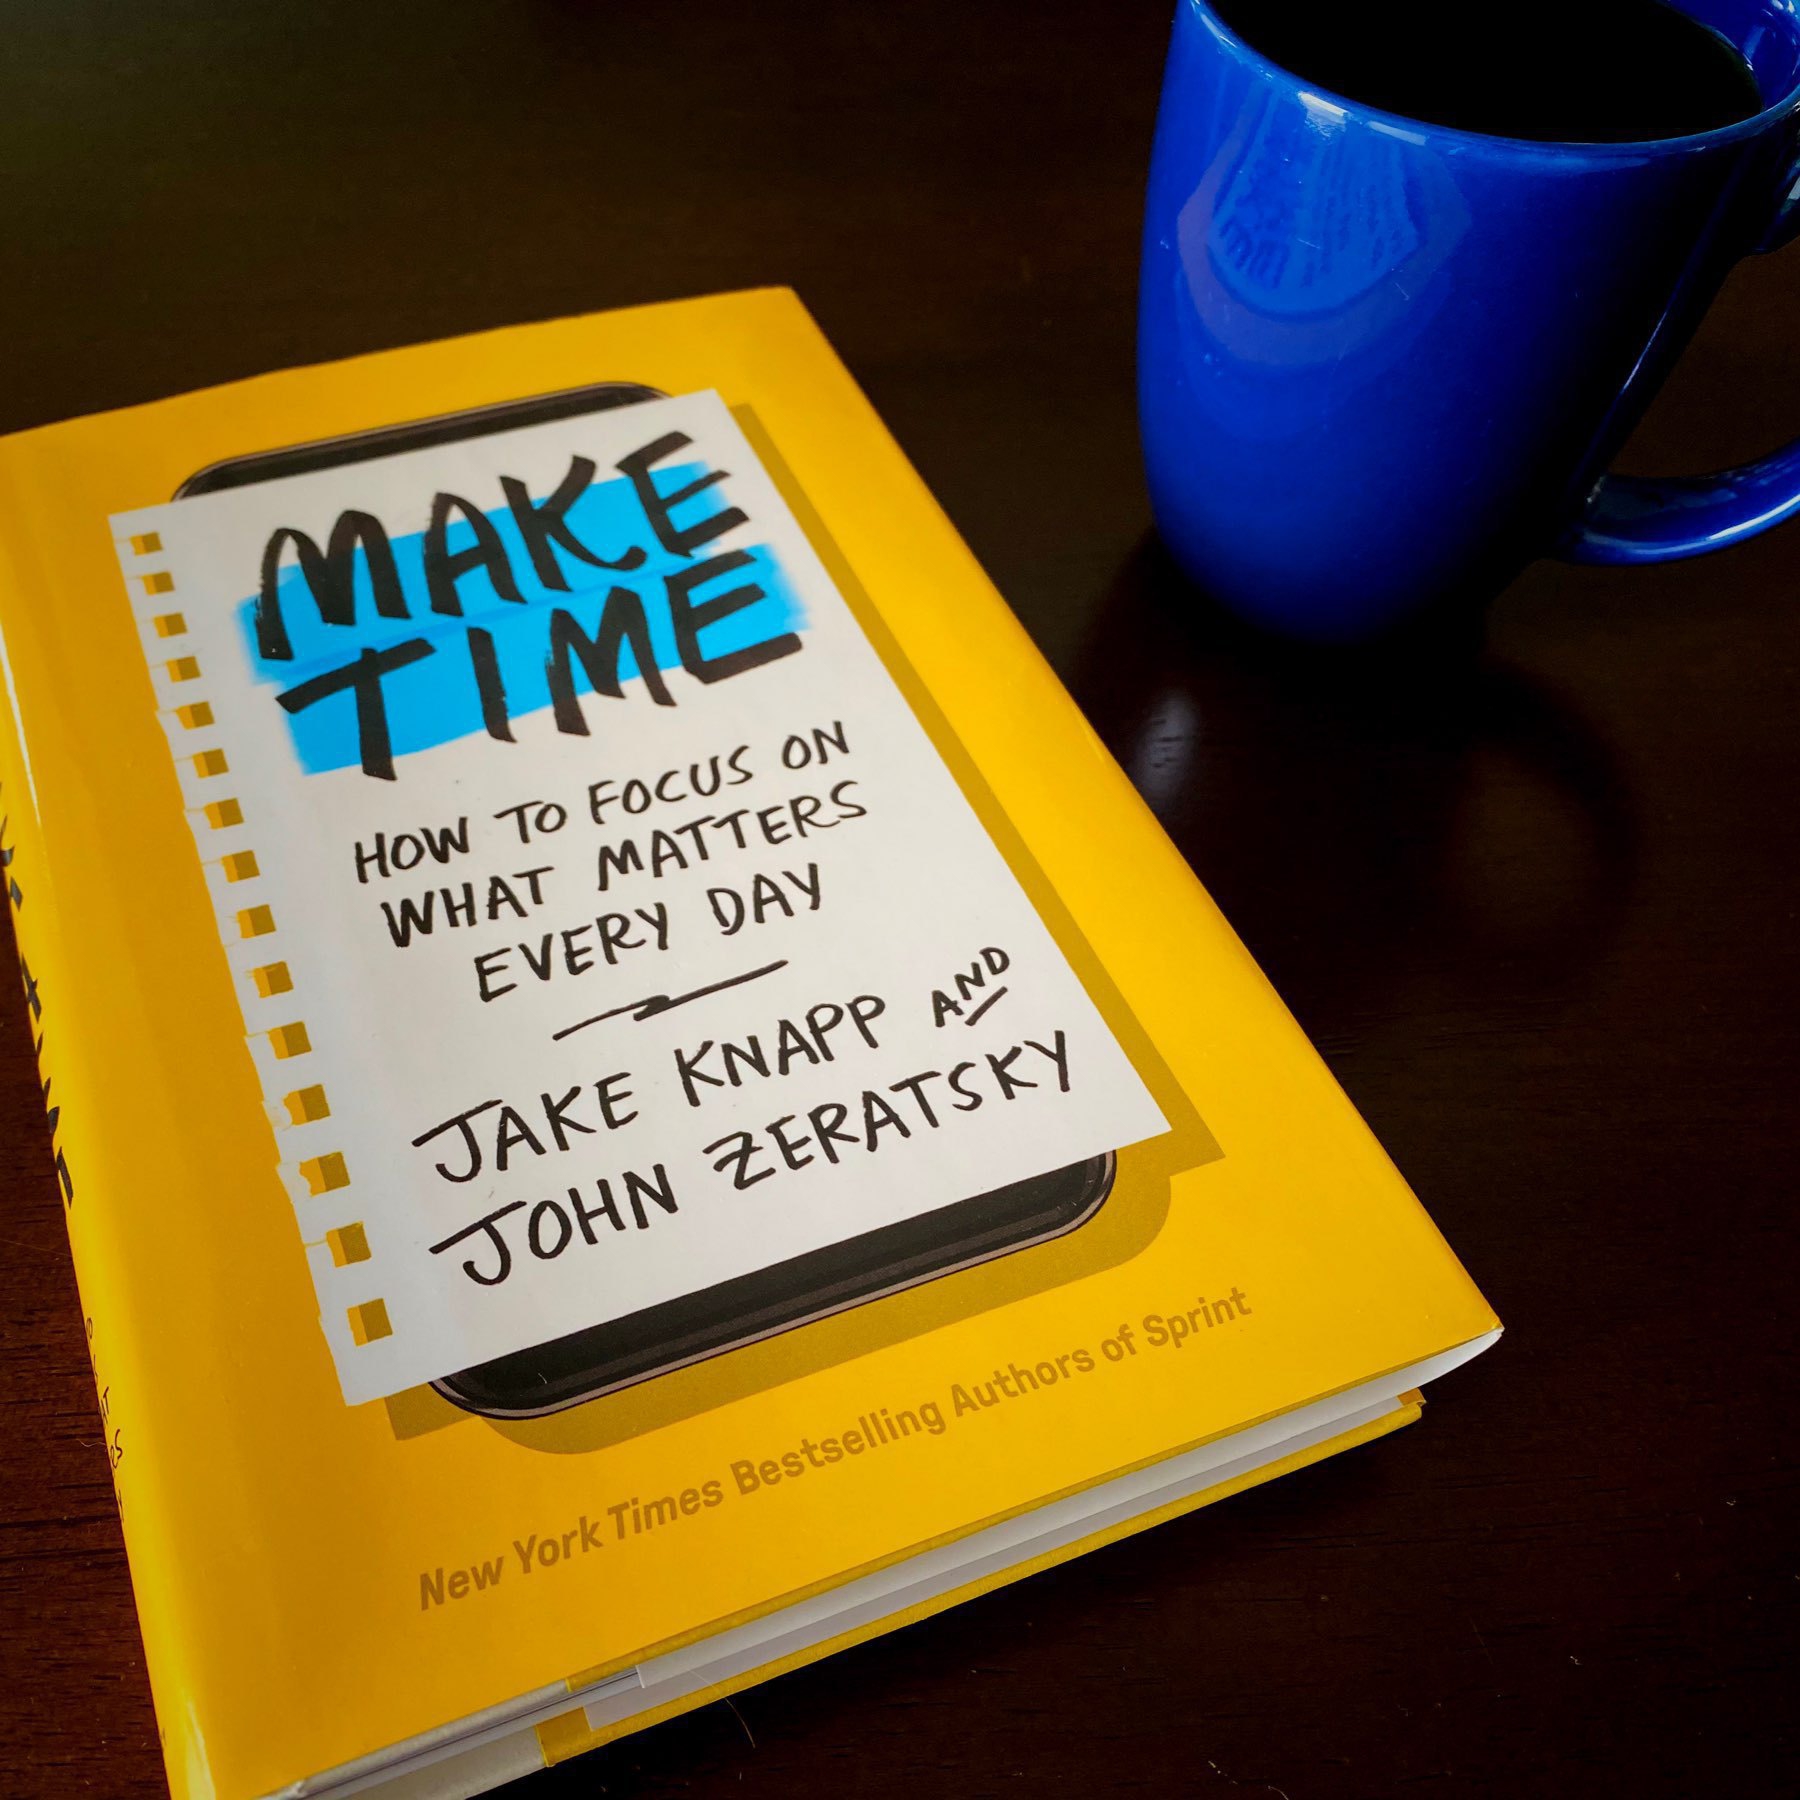 Make Time book sitting on a table next to a coffee mug